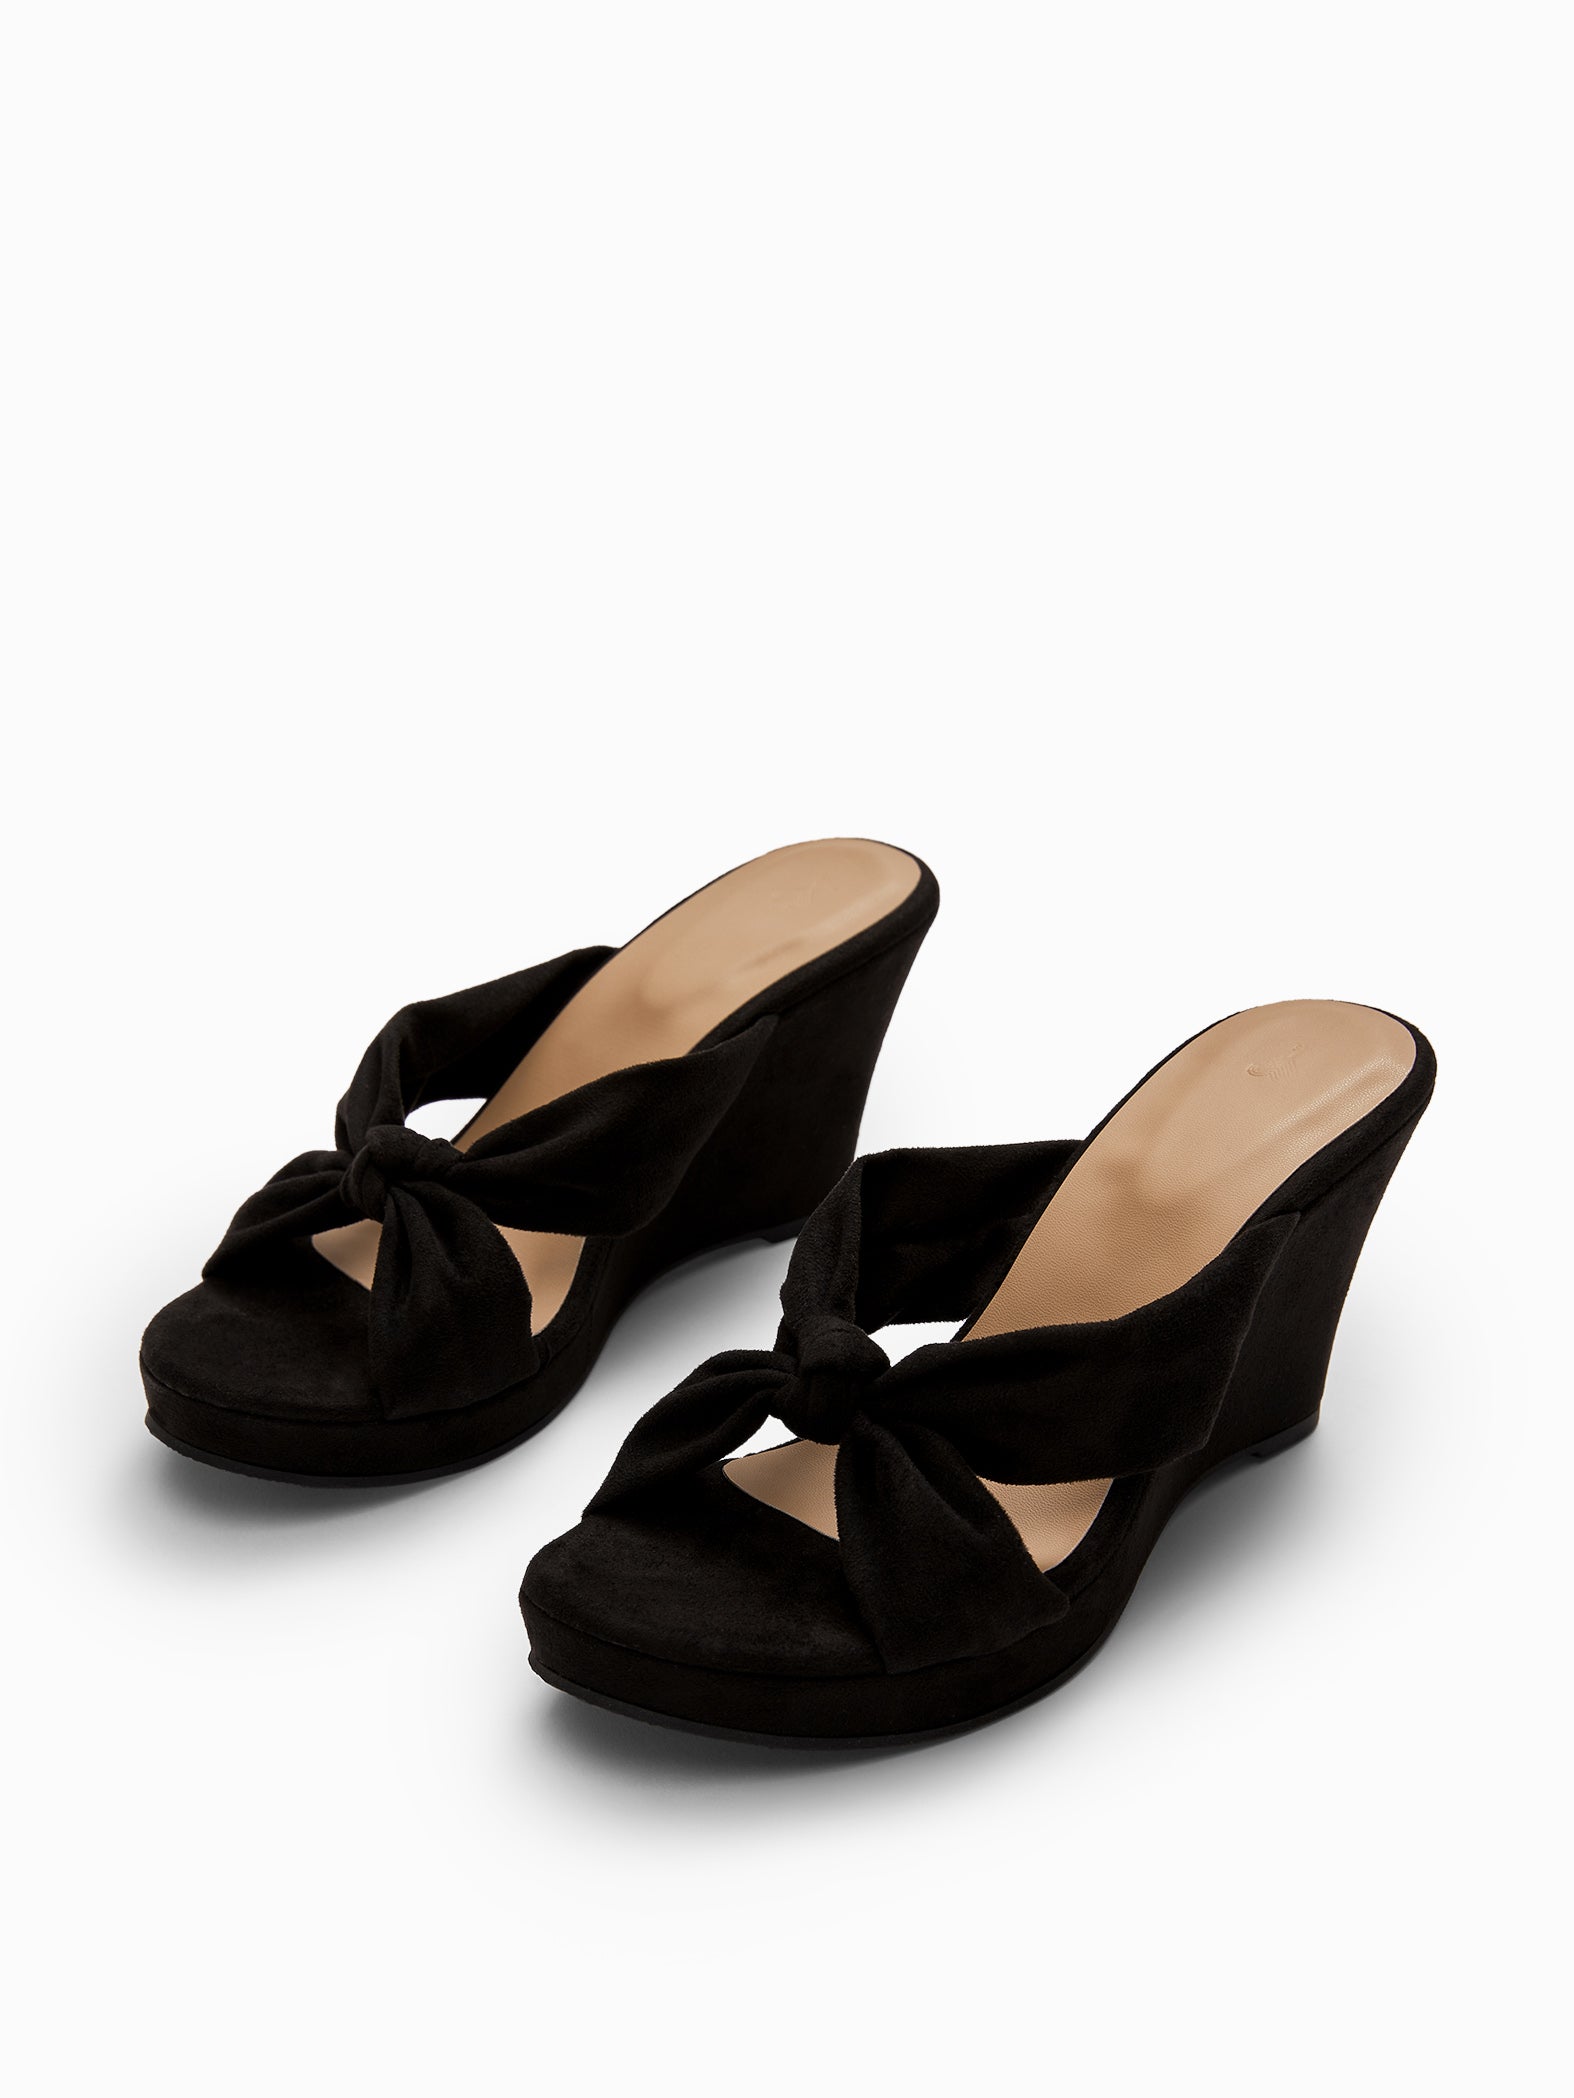 Black Suede Knotted Wedges